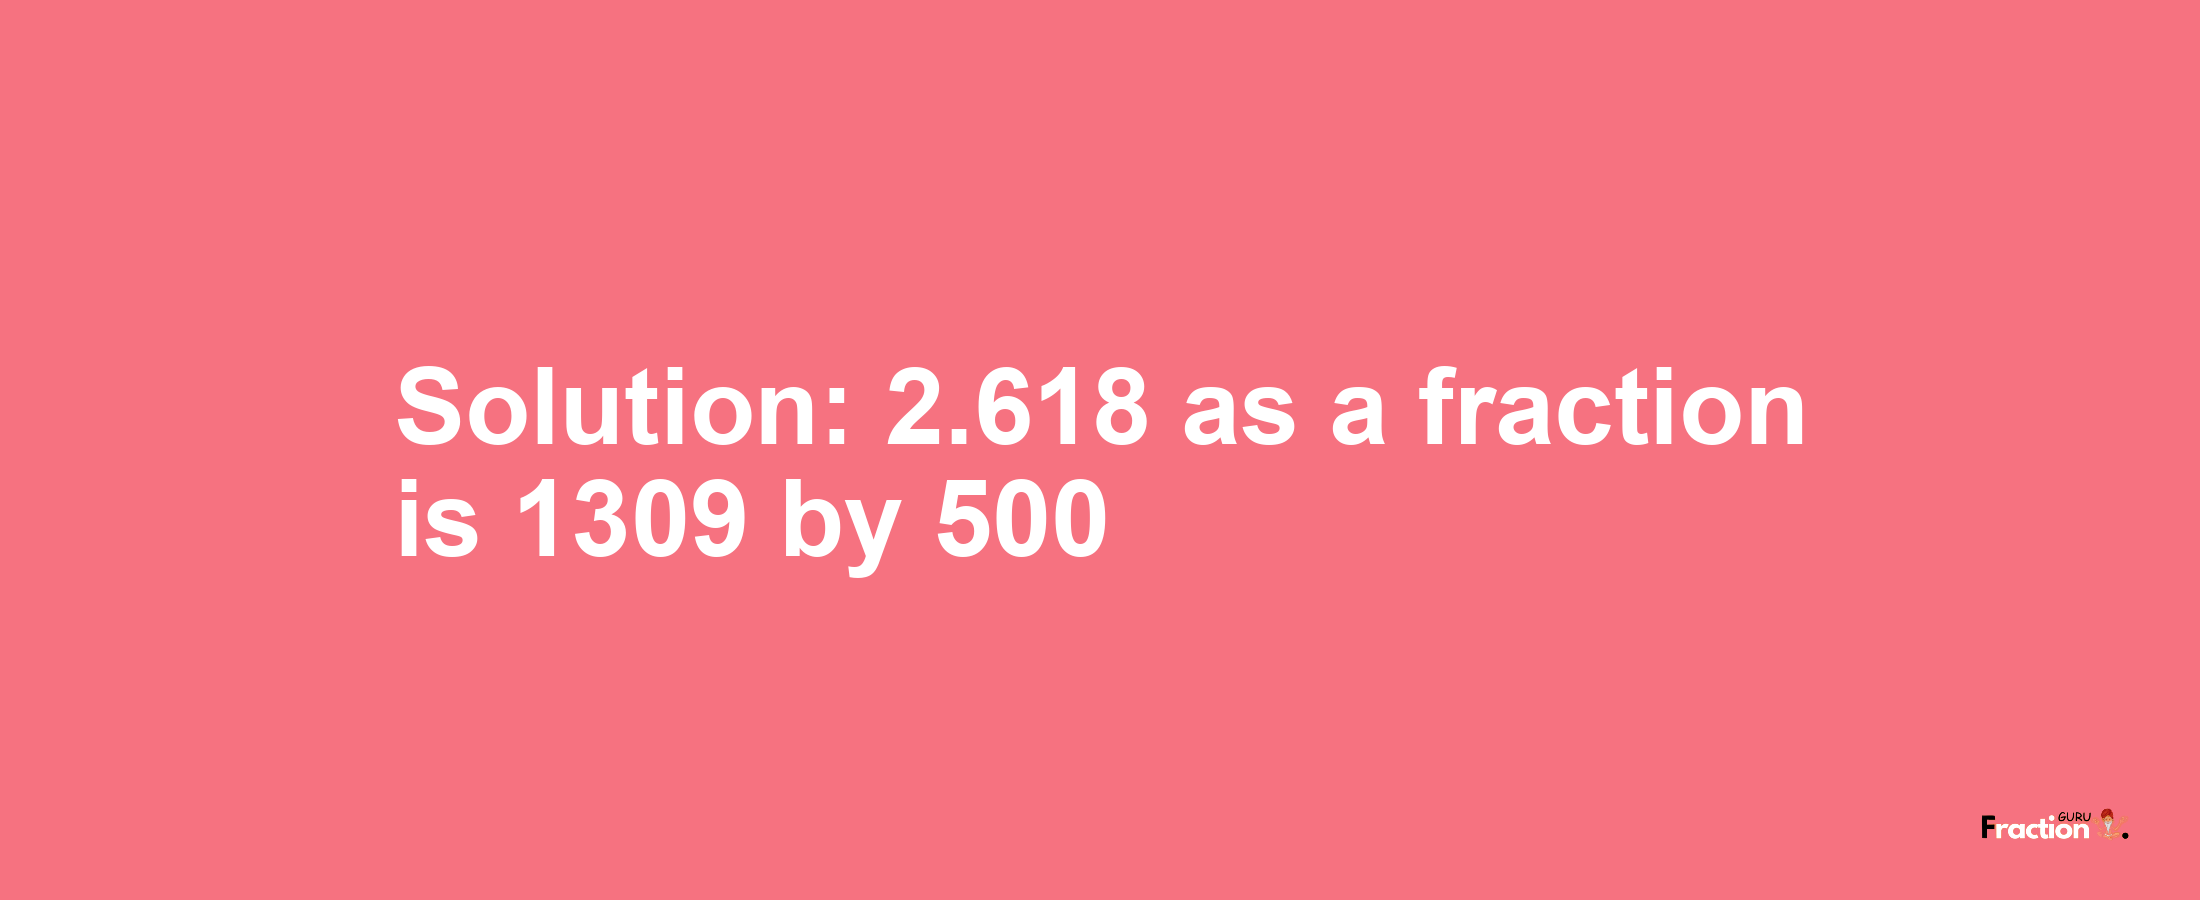 Solution:2.618 as a fraction is 1309/500